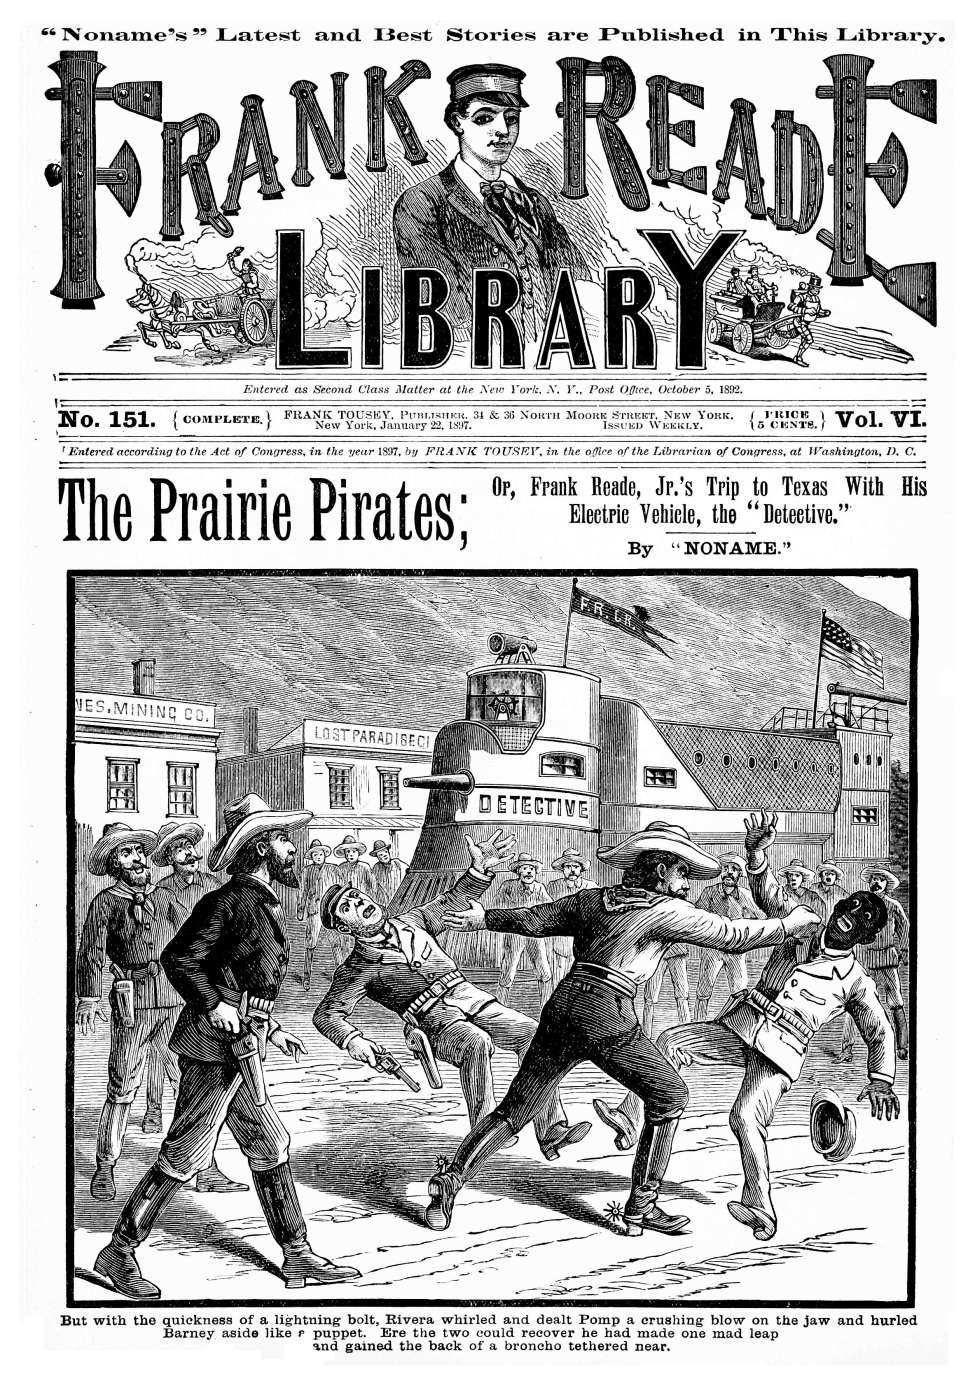 Book Cover For v06 151 - The Prairie Pirates